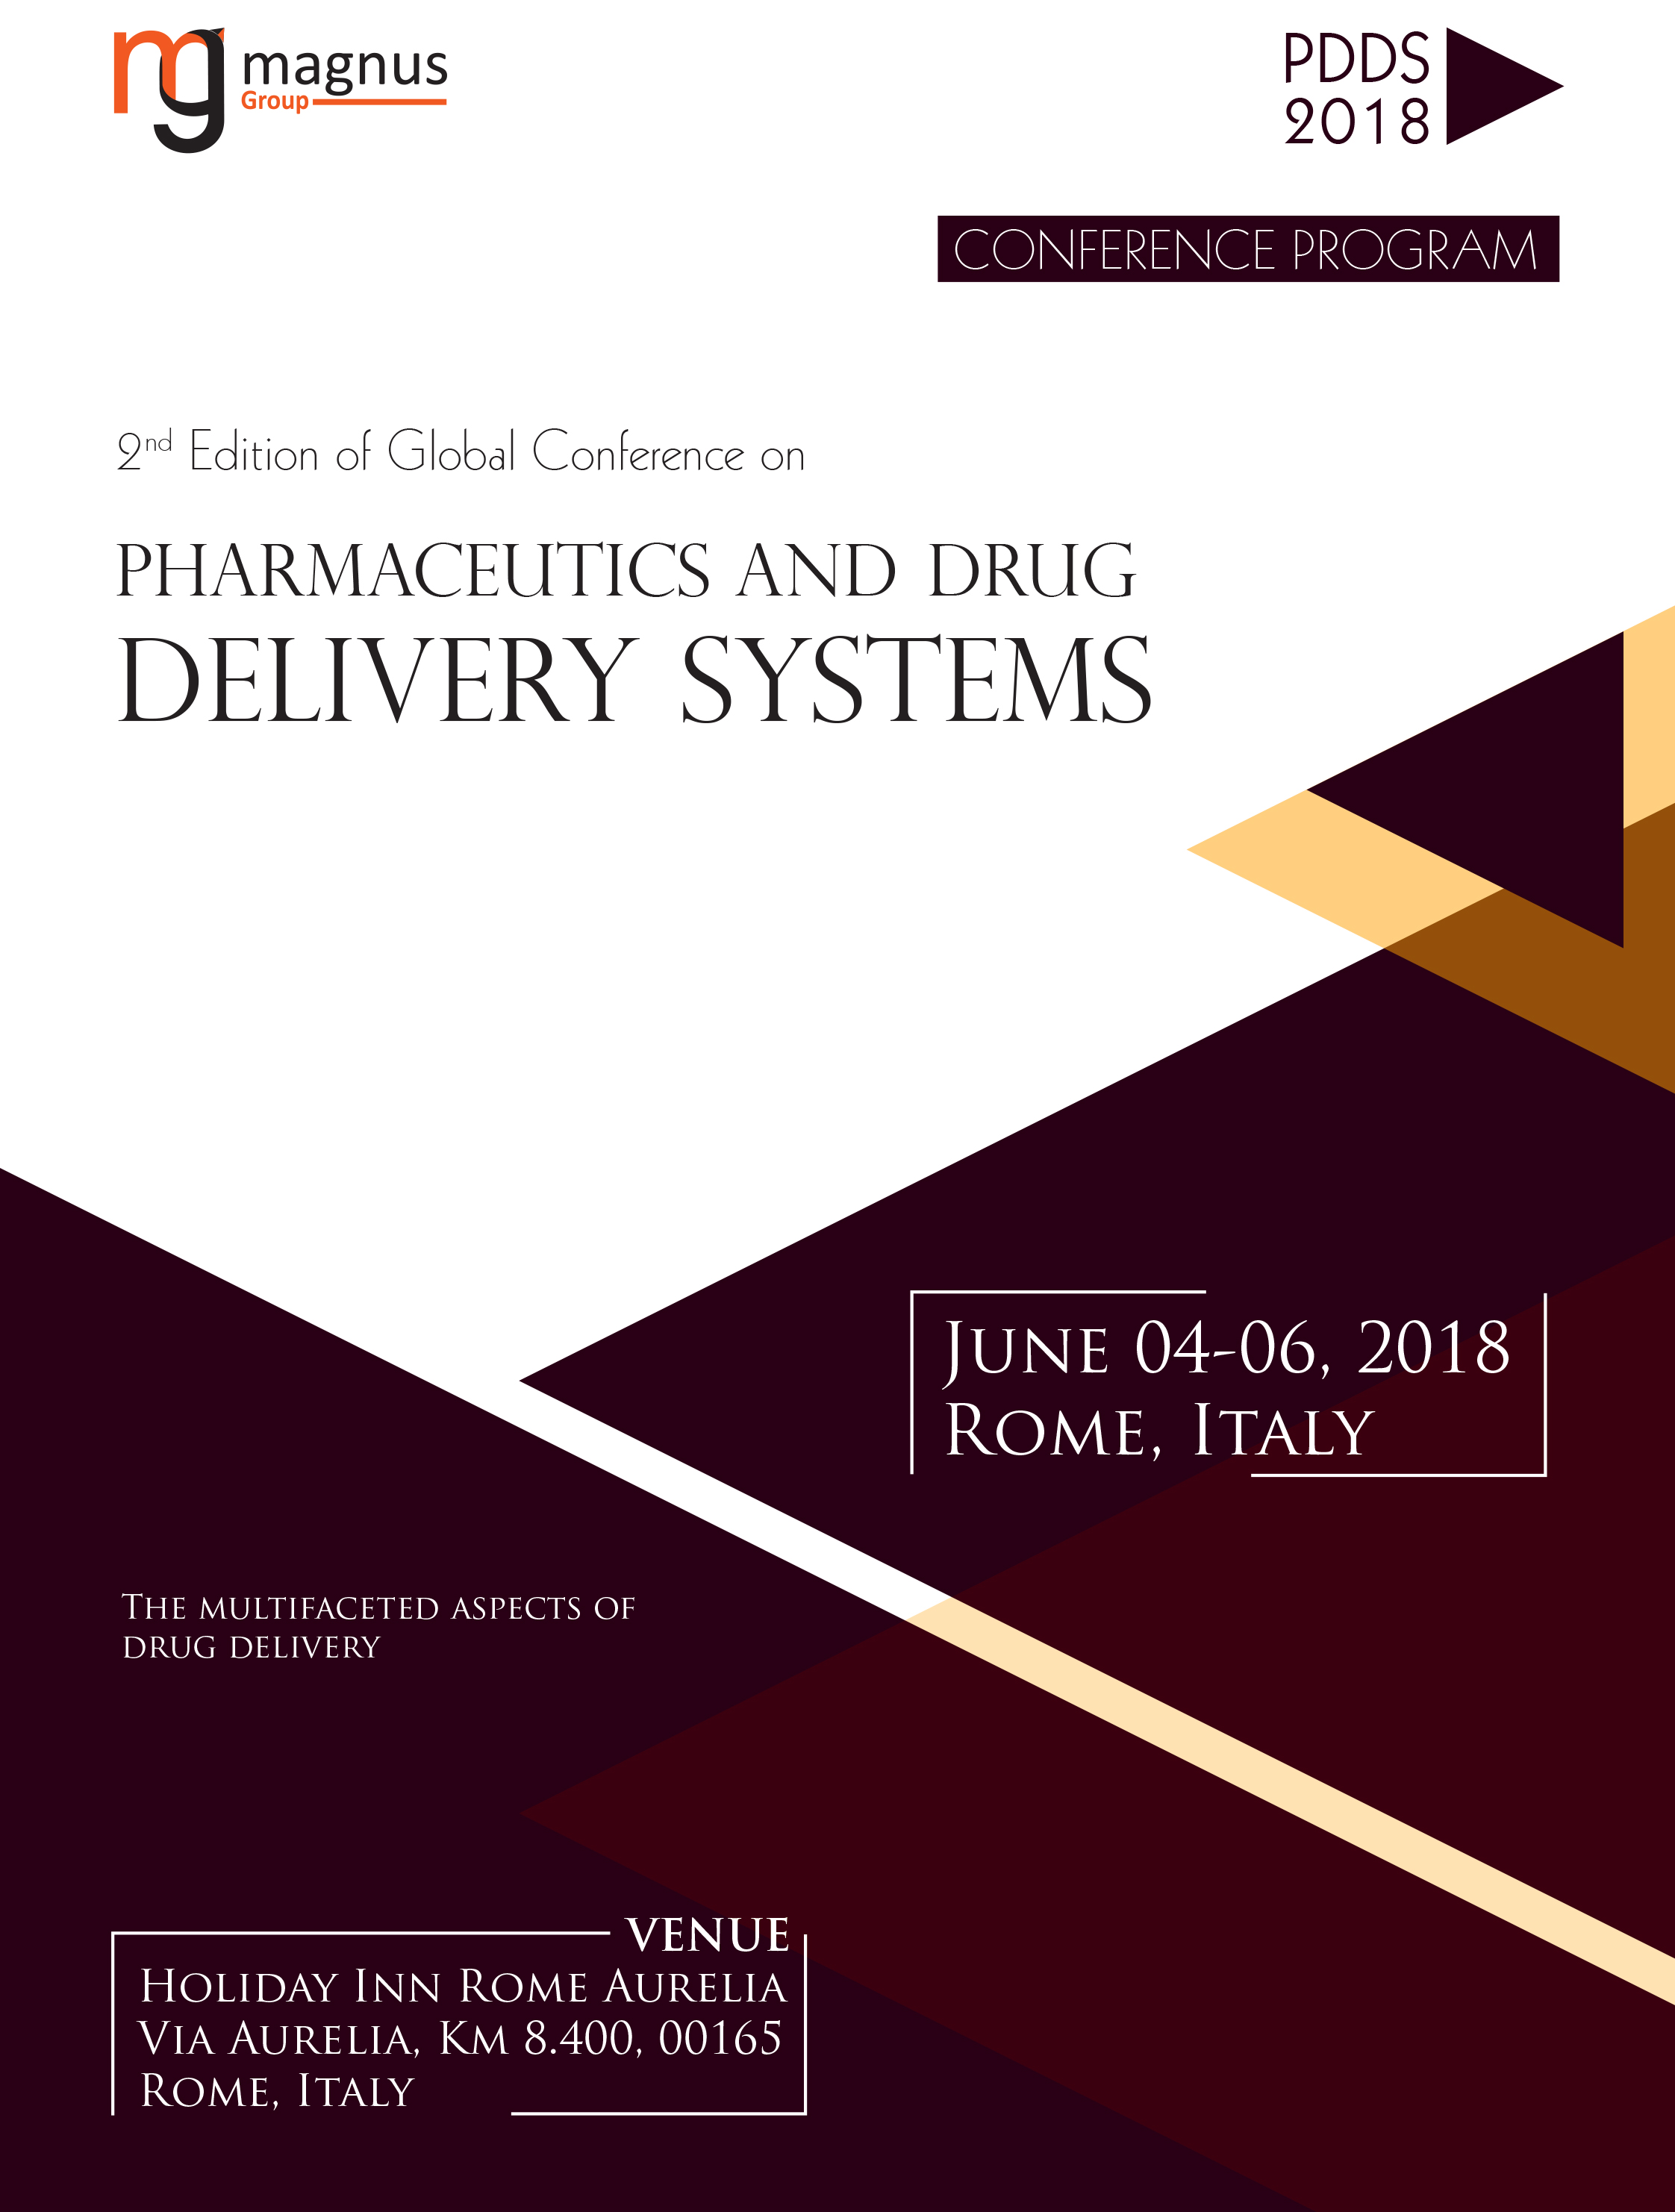 2nd Edition of Global Conference on Pharmaceutics and Drug Delivery Systems | Rome, Italy Program